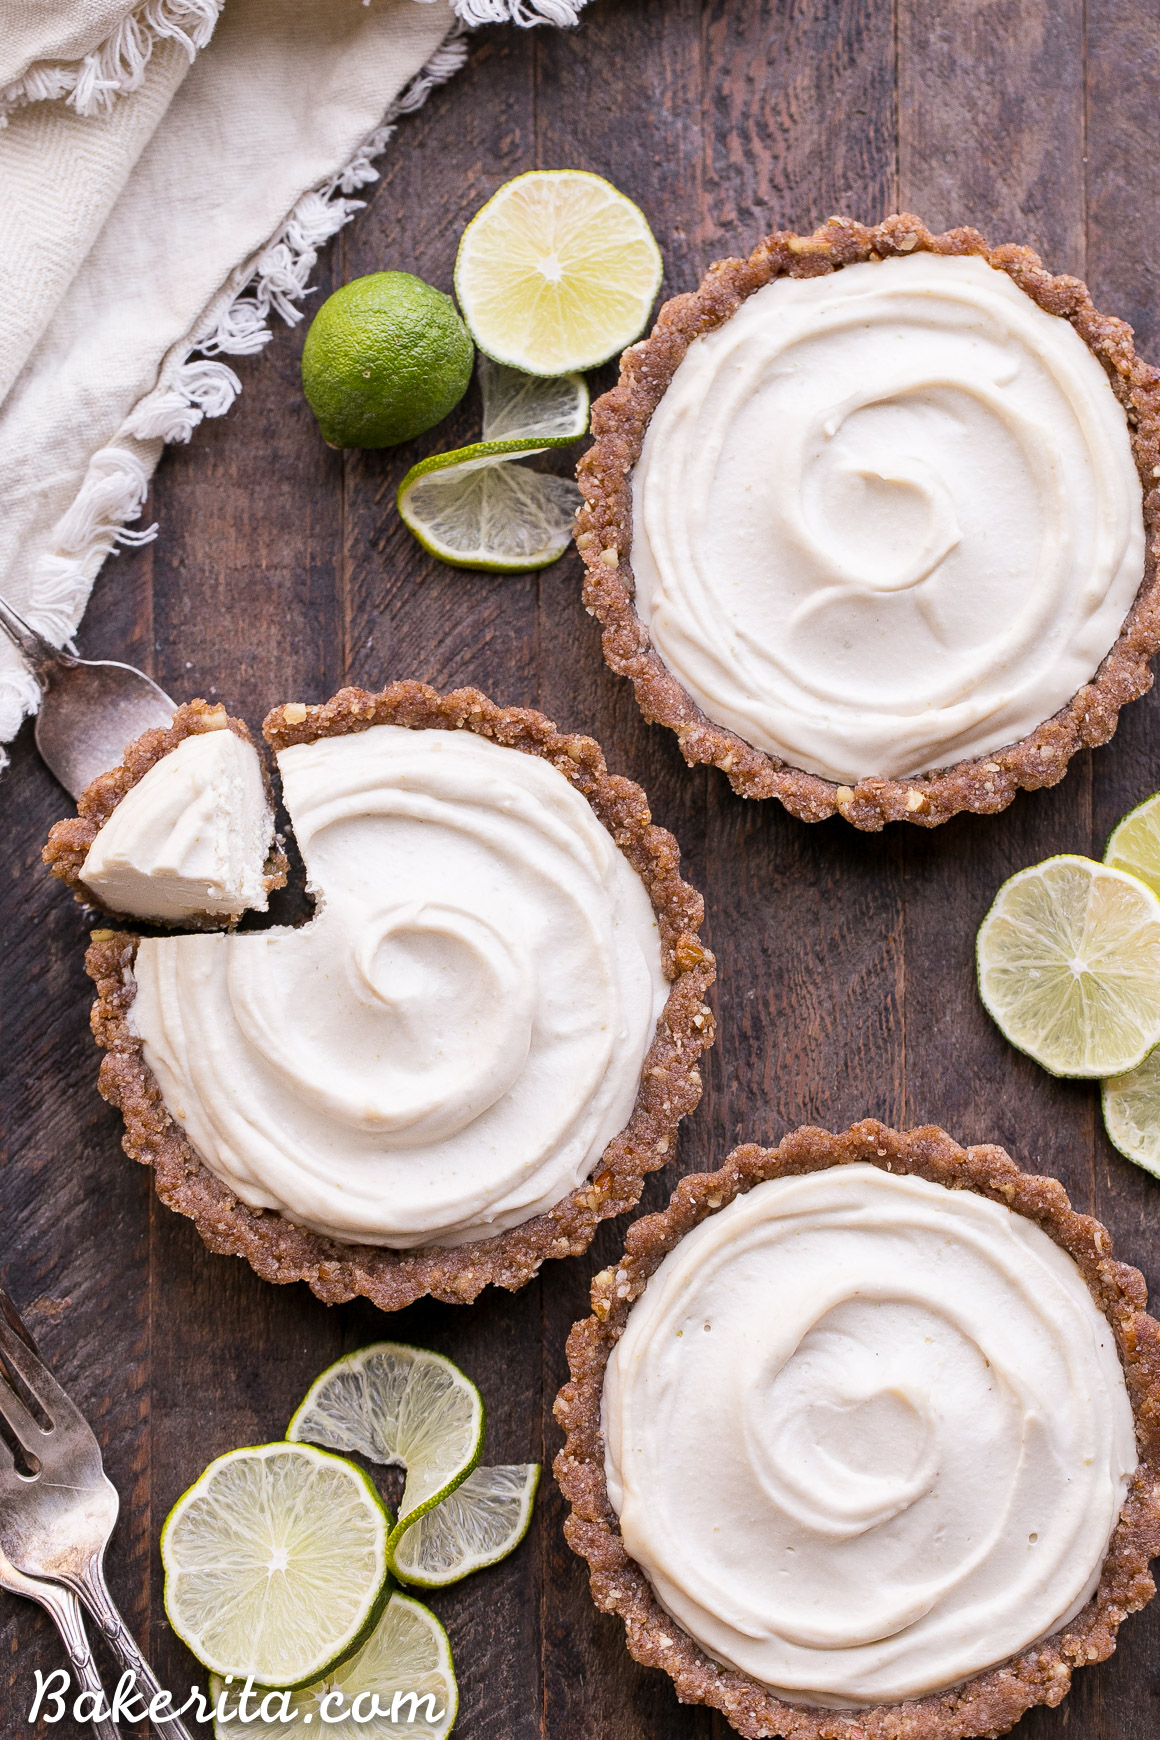 These No-Bake Lime Tarts are smooth and creamy with a bright, refreshing lime flavor. These no-bake, raw tarts are easy to make and they're gluten-free, paleo, and vegan. They're the perfect cool summer treat!